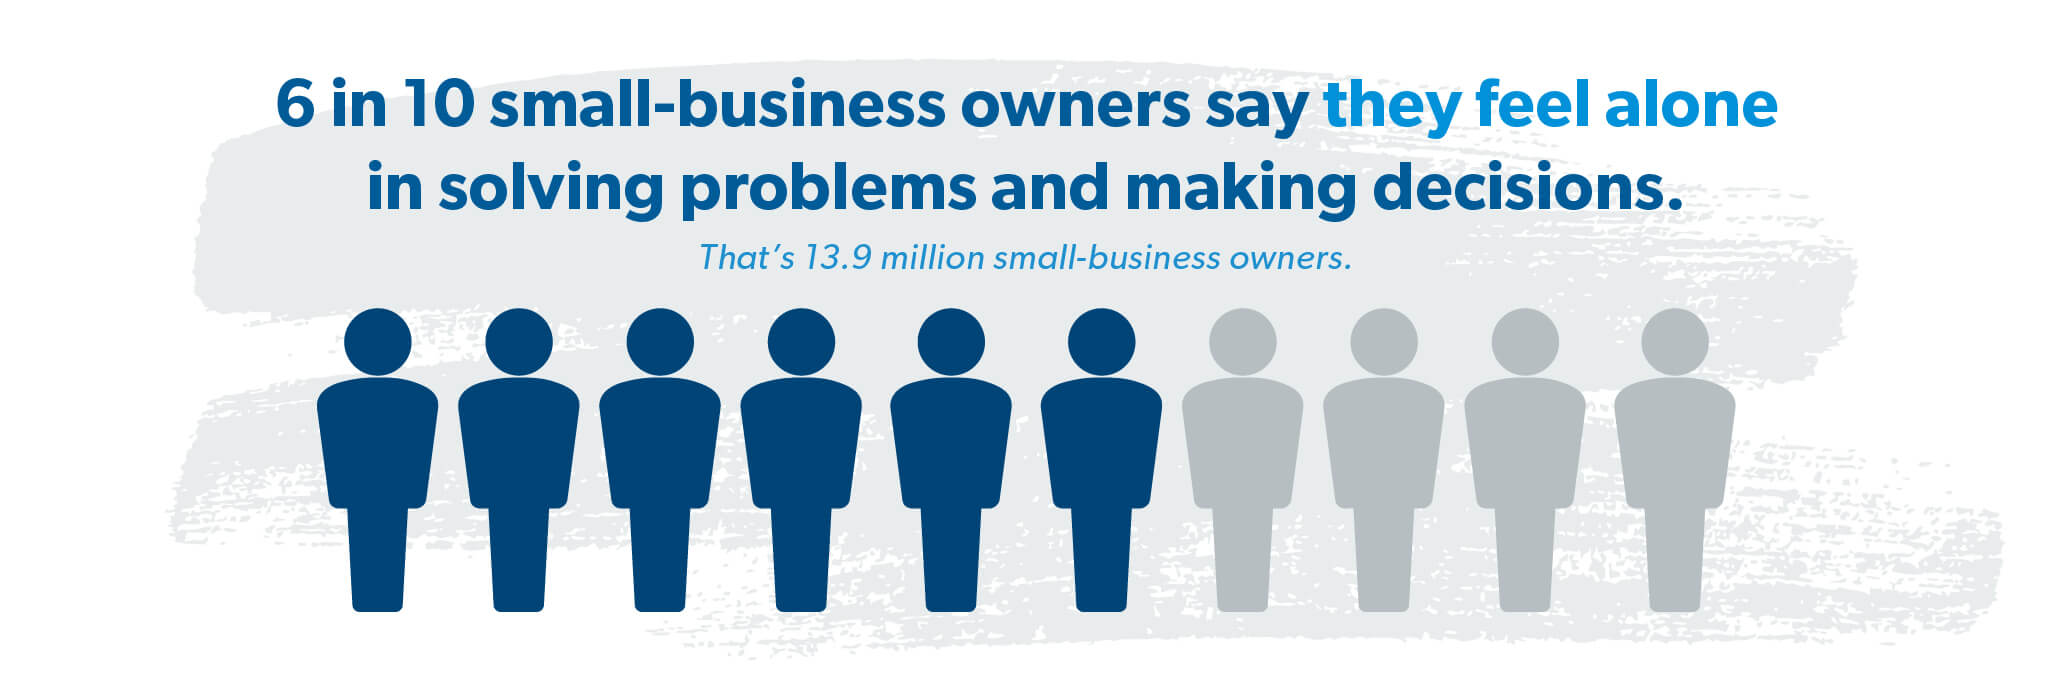 6 in 10 small-business owners say they feel alone in solving problems and making decisions